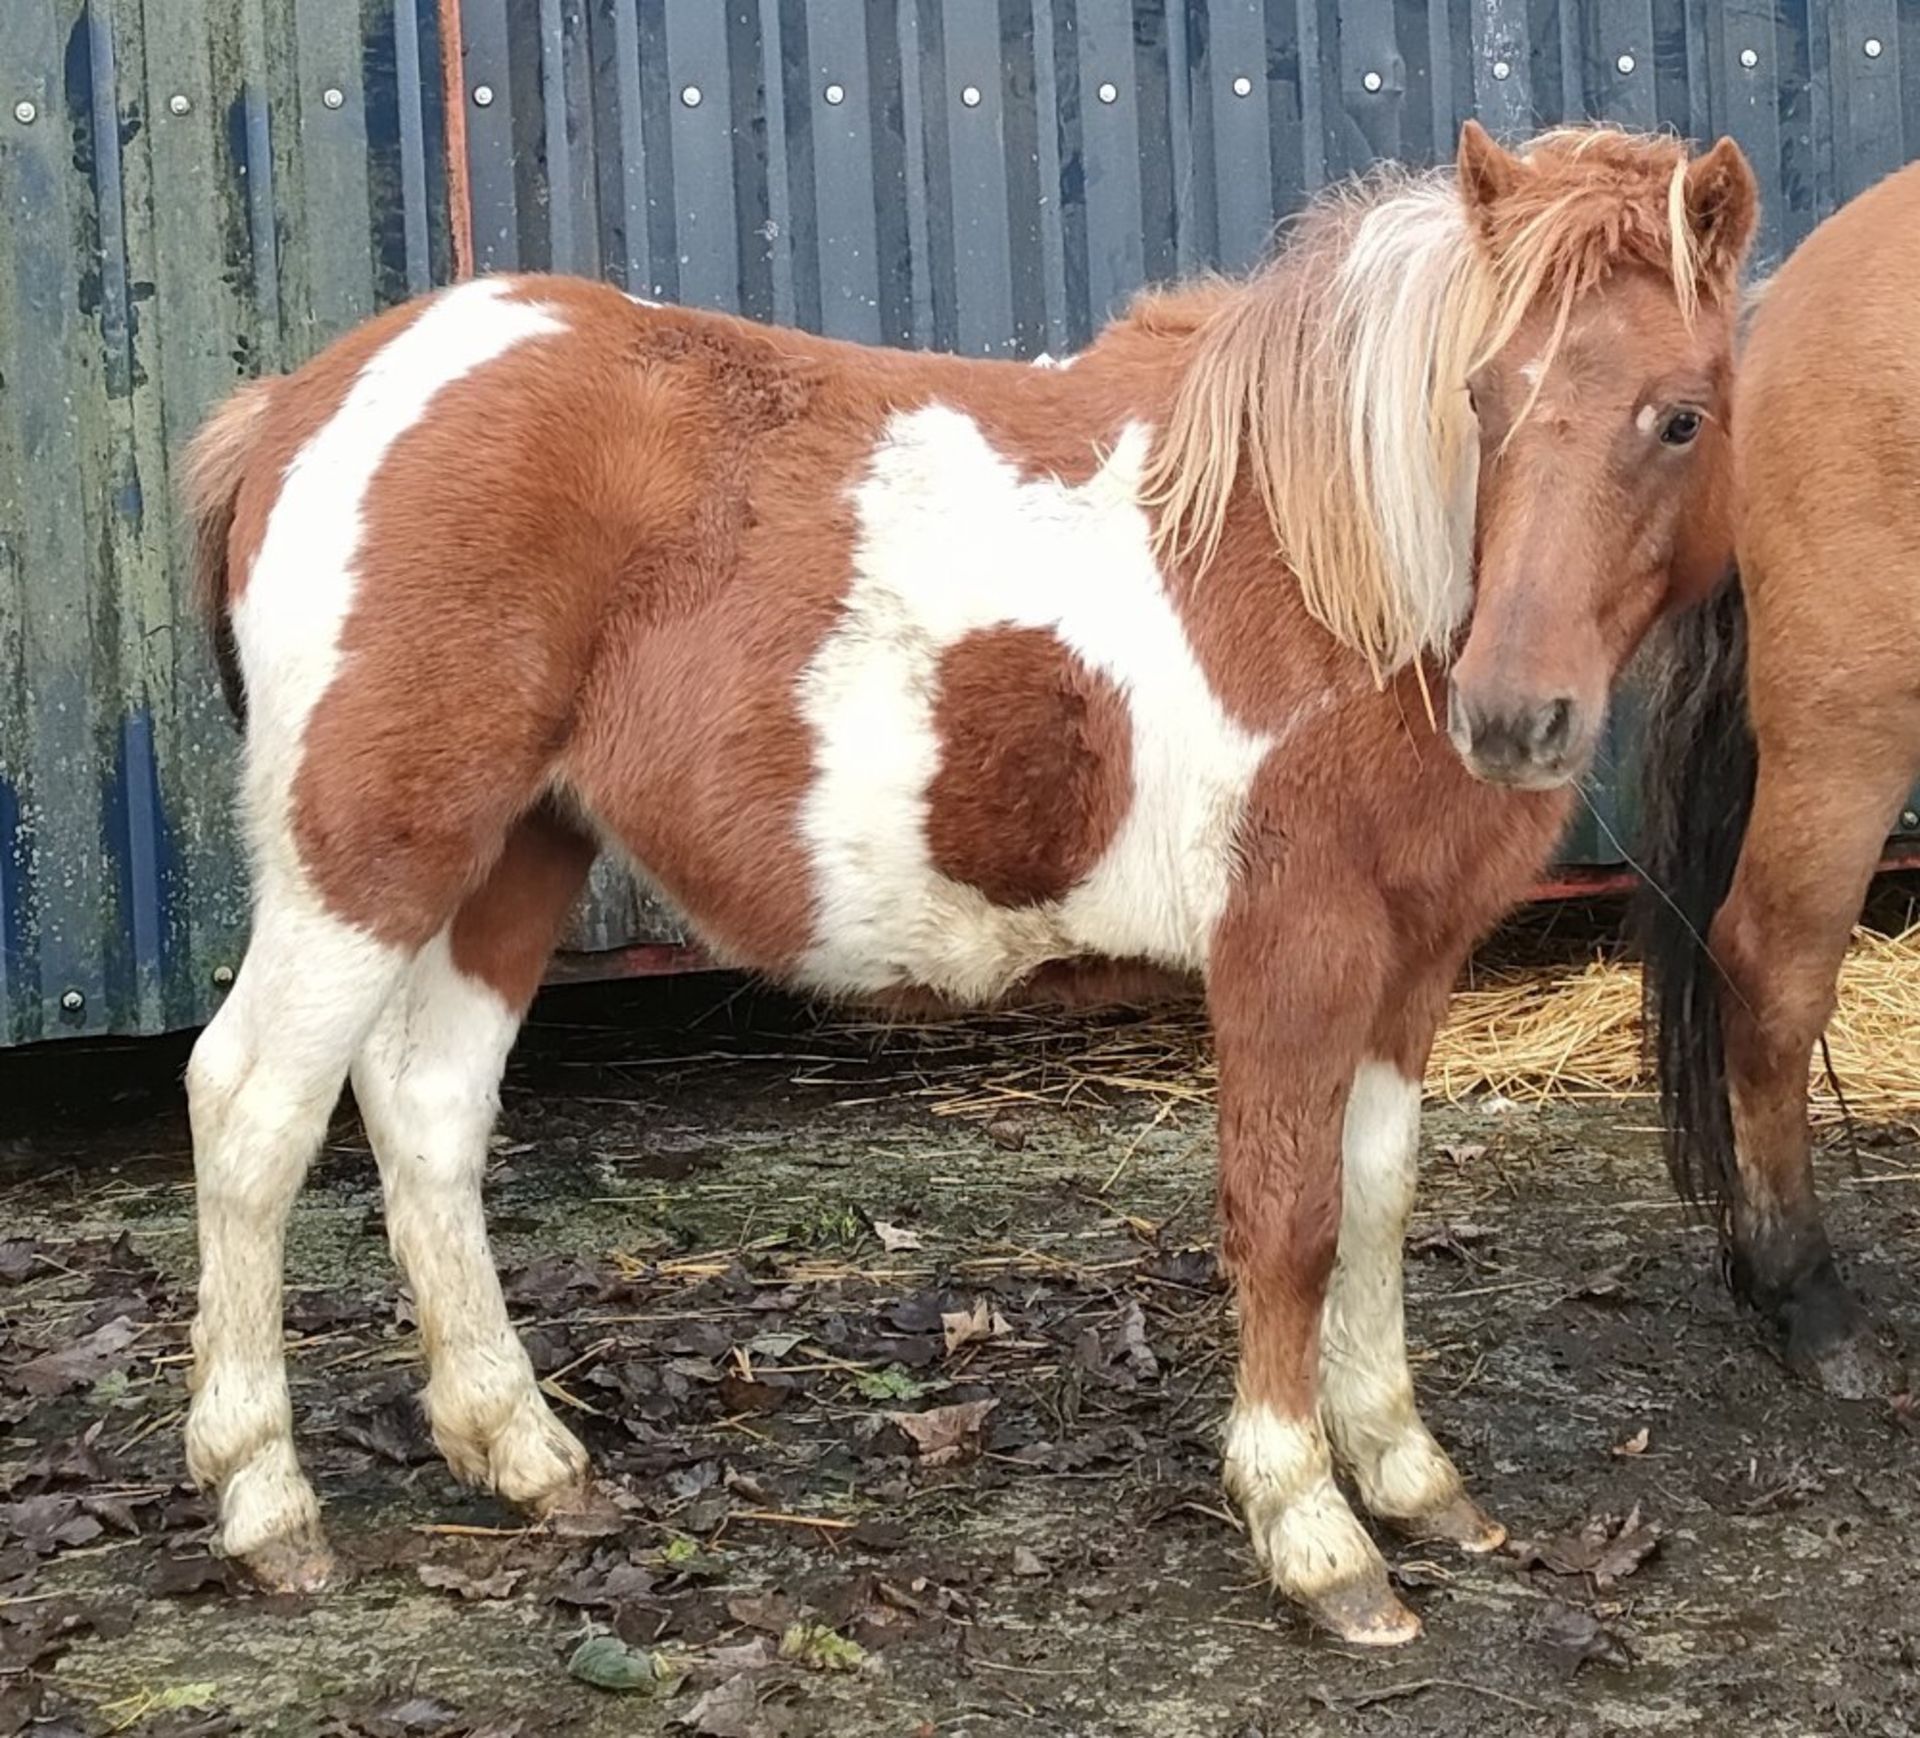 'GODSWORTHY' DARTMOOR HILL PONY SKEWBALD FILLY APPROX 18 MONTHS OLD